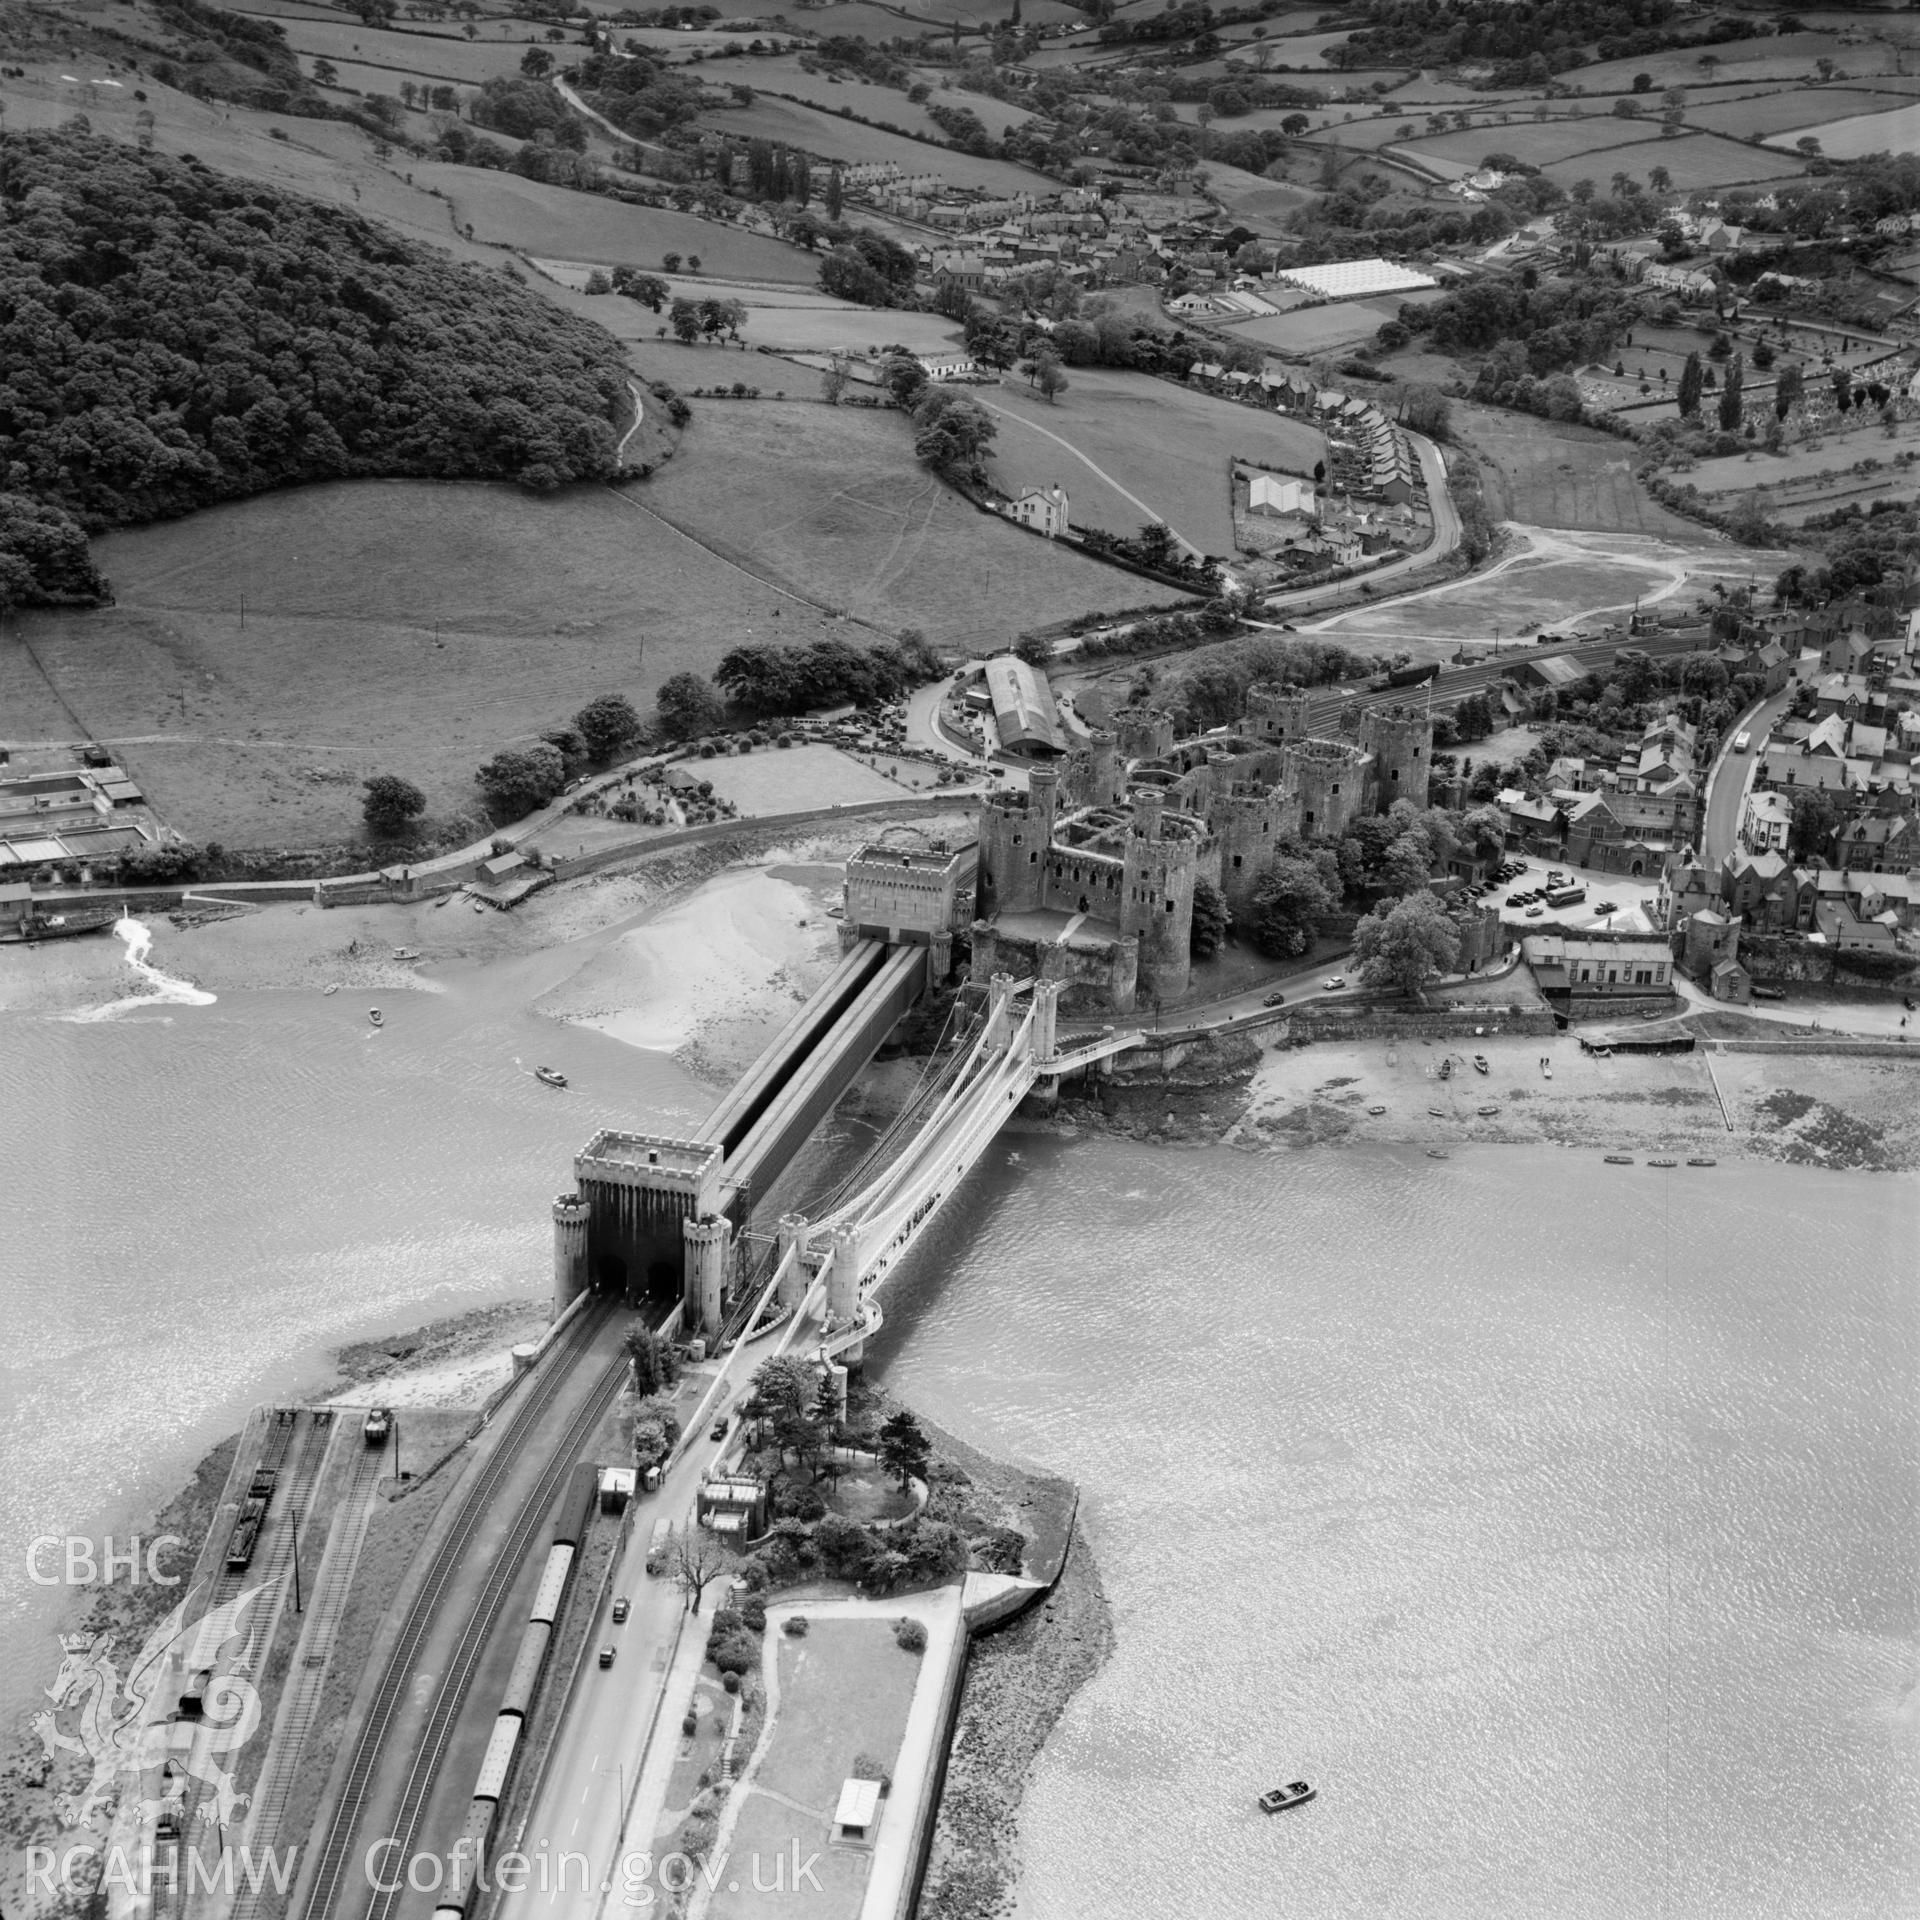 View of Conwy showing castle and bridges